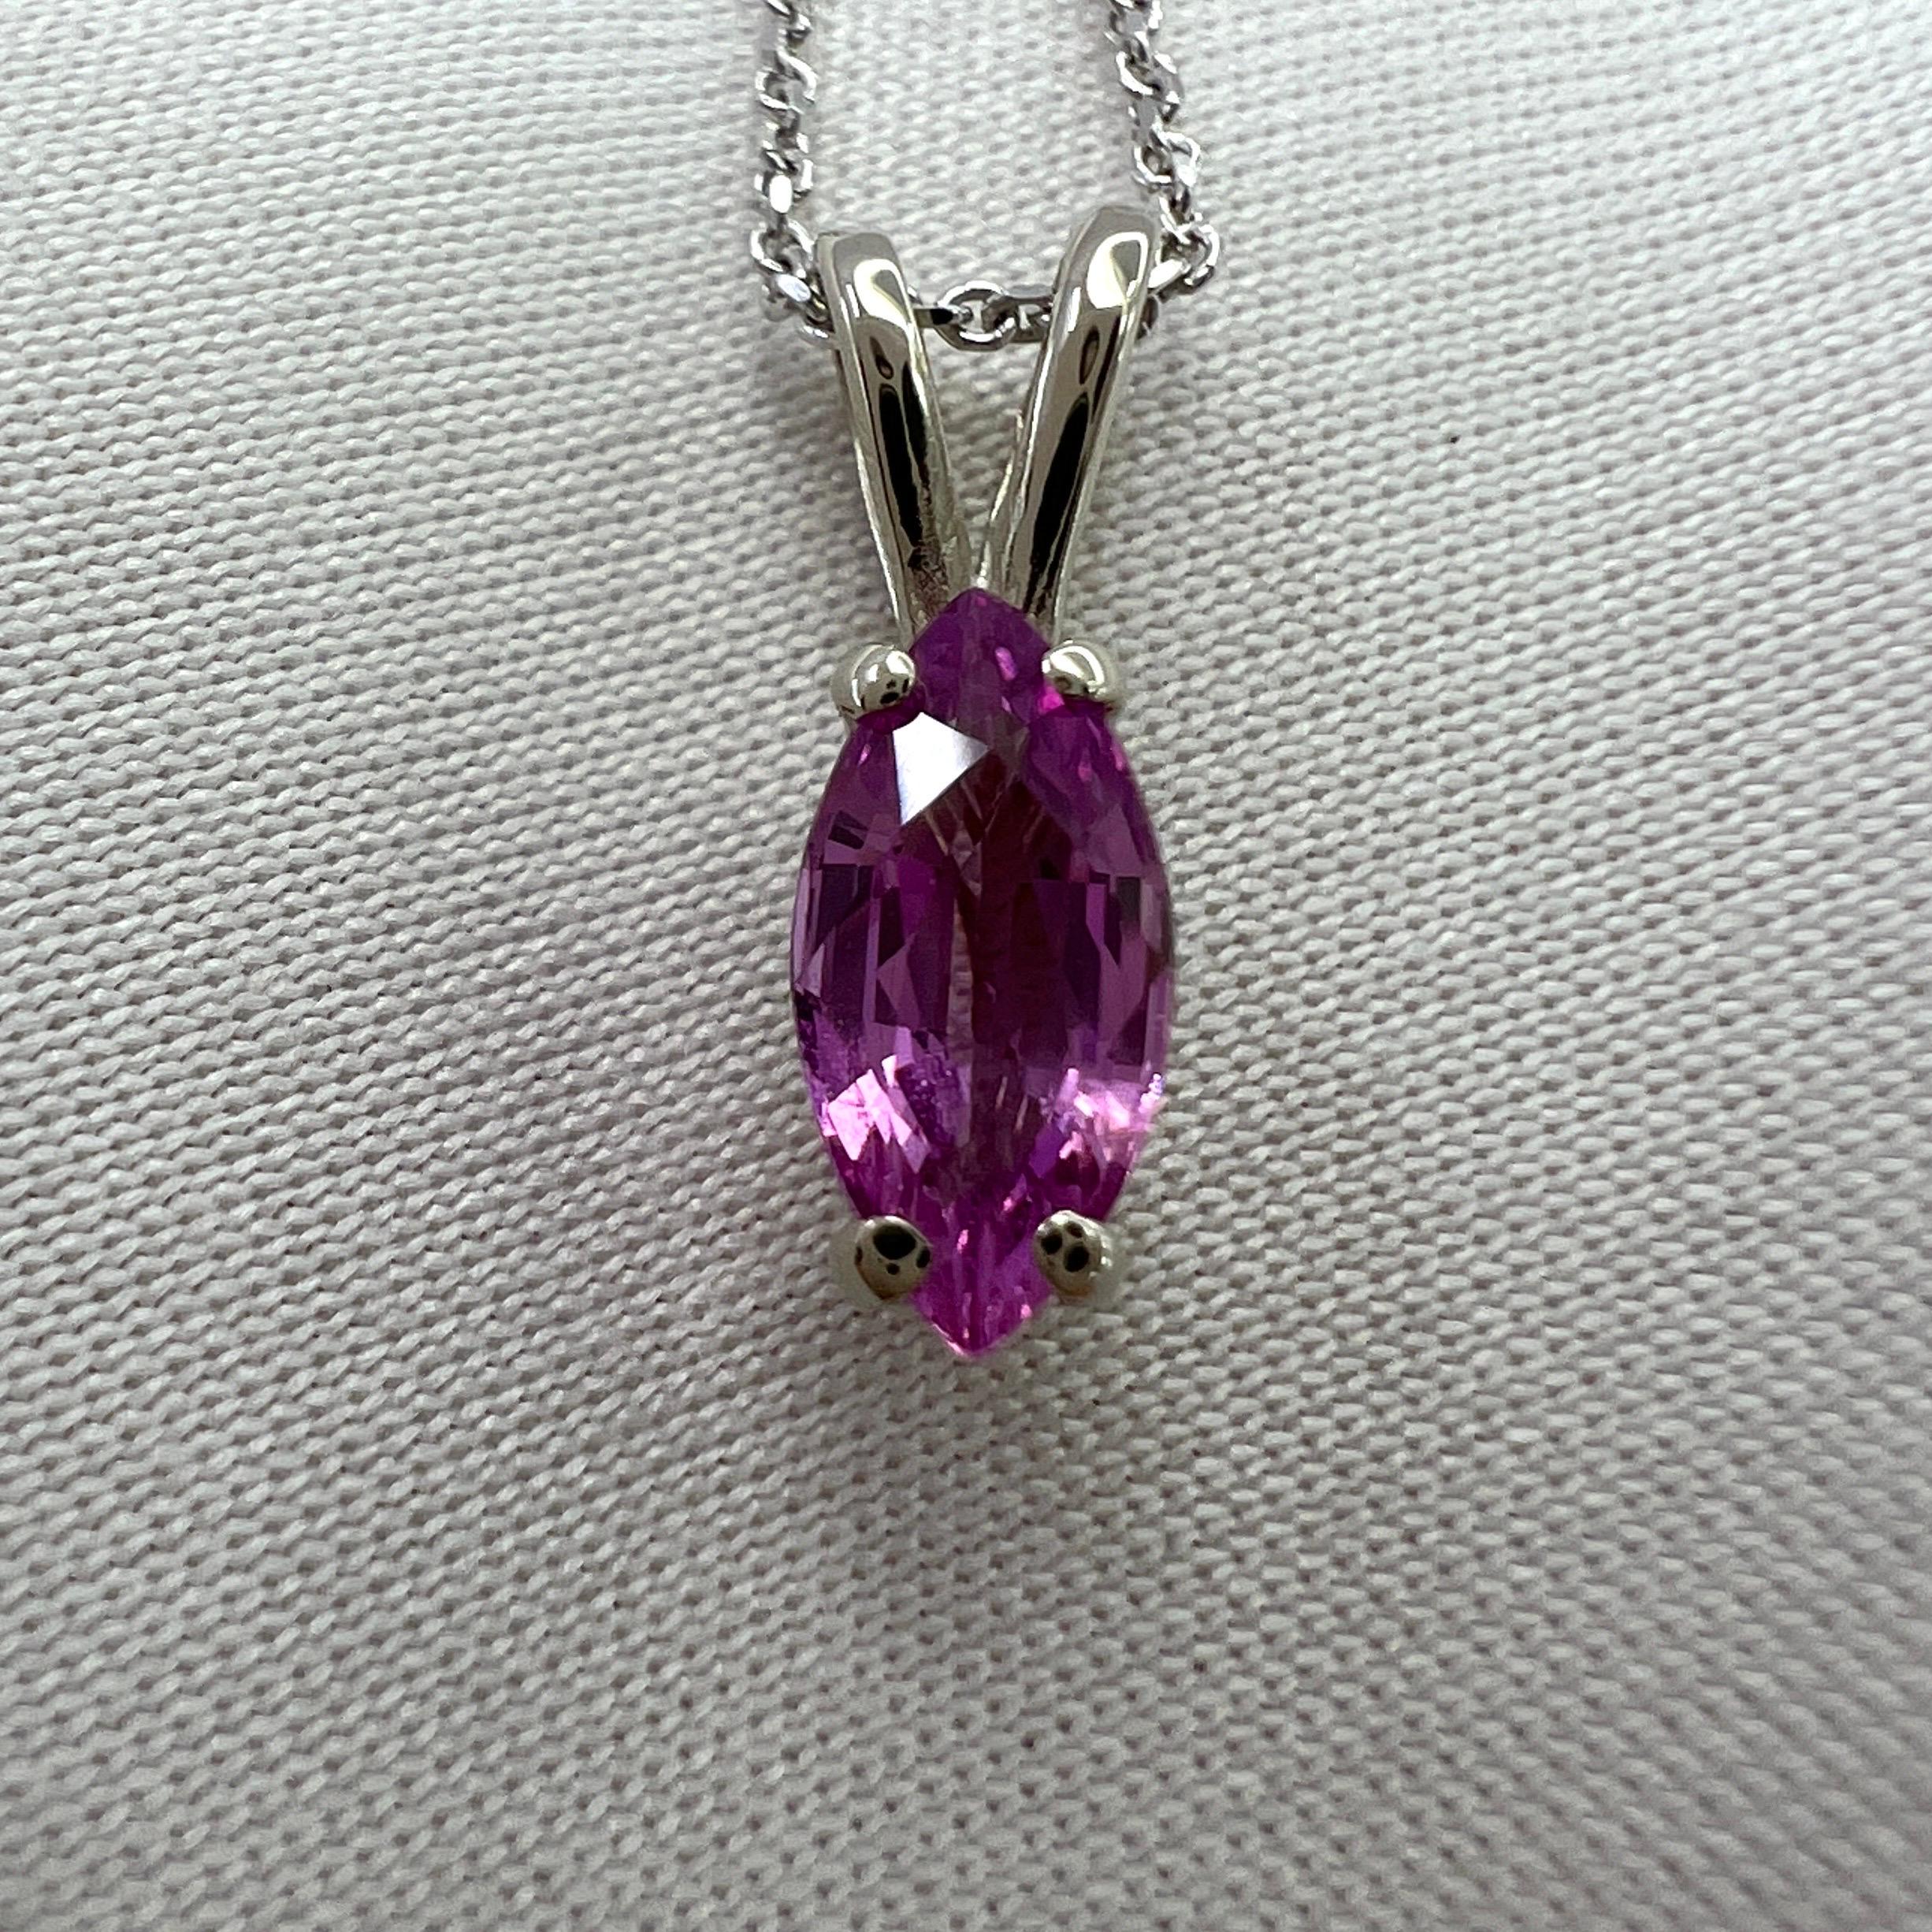 Fine Vivid Pink Sapphire 14k White Gold Solitaire Pendant Necklace.

0.66 Carat vivid pink sapphire with an excellent marquise/navette cut and excellent clarity, very clean gem.

Fully certified by IGI Antwerp confirming sapphire as untreated and